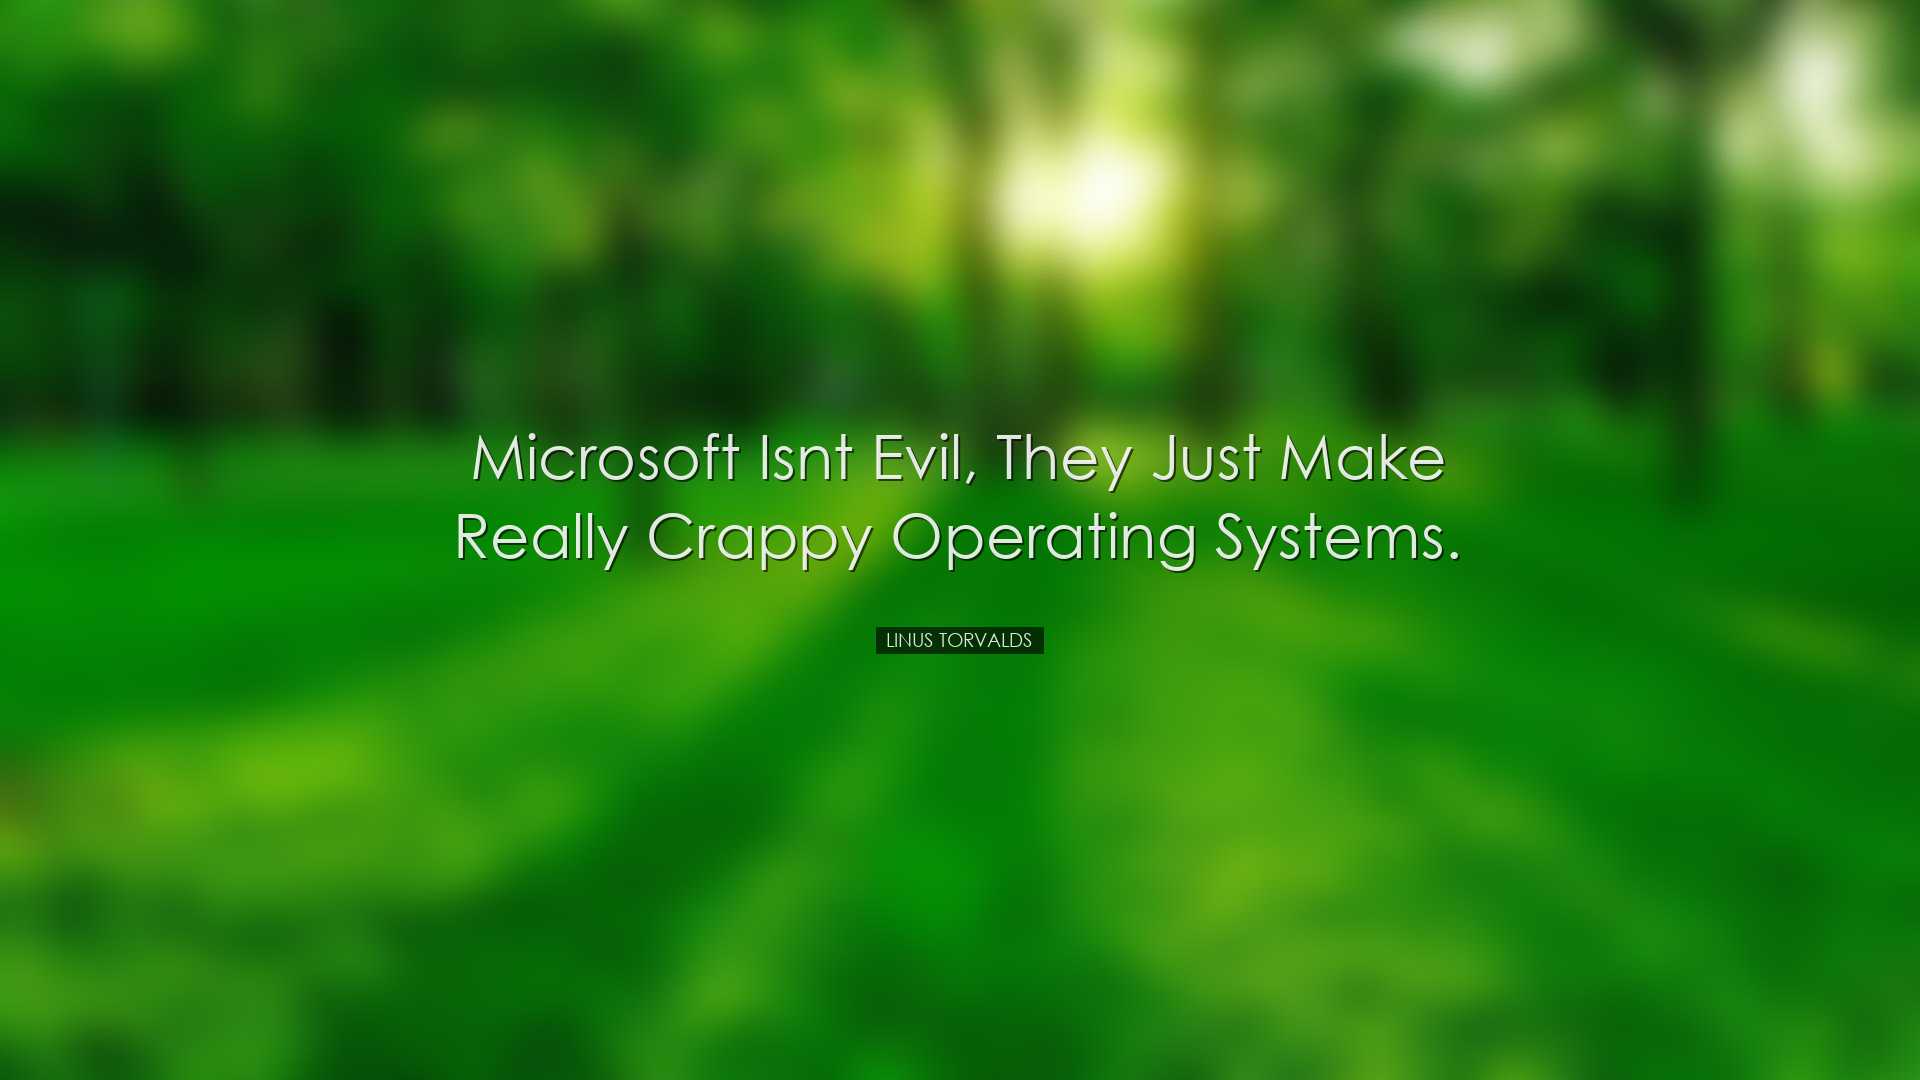 Microsoft isnt evil, they just make really crappy operating system